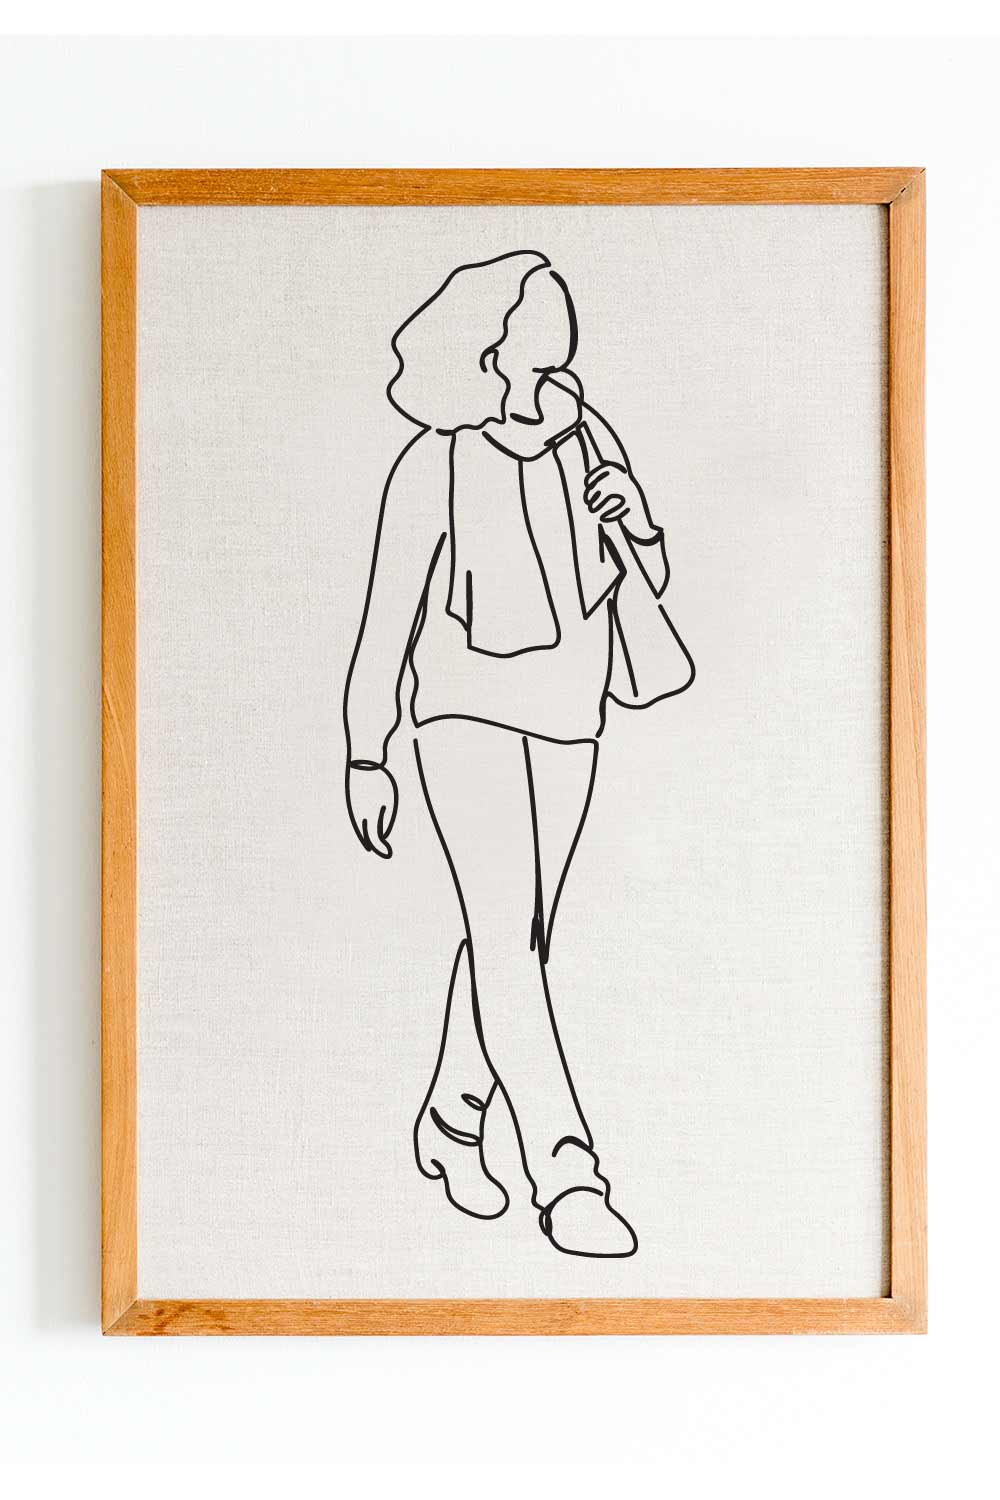 Girl walking Single Line Art Drawing For Personal Or Commercial Use pinterest preview image.